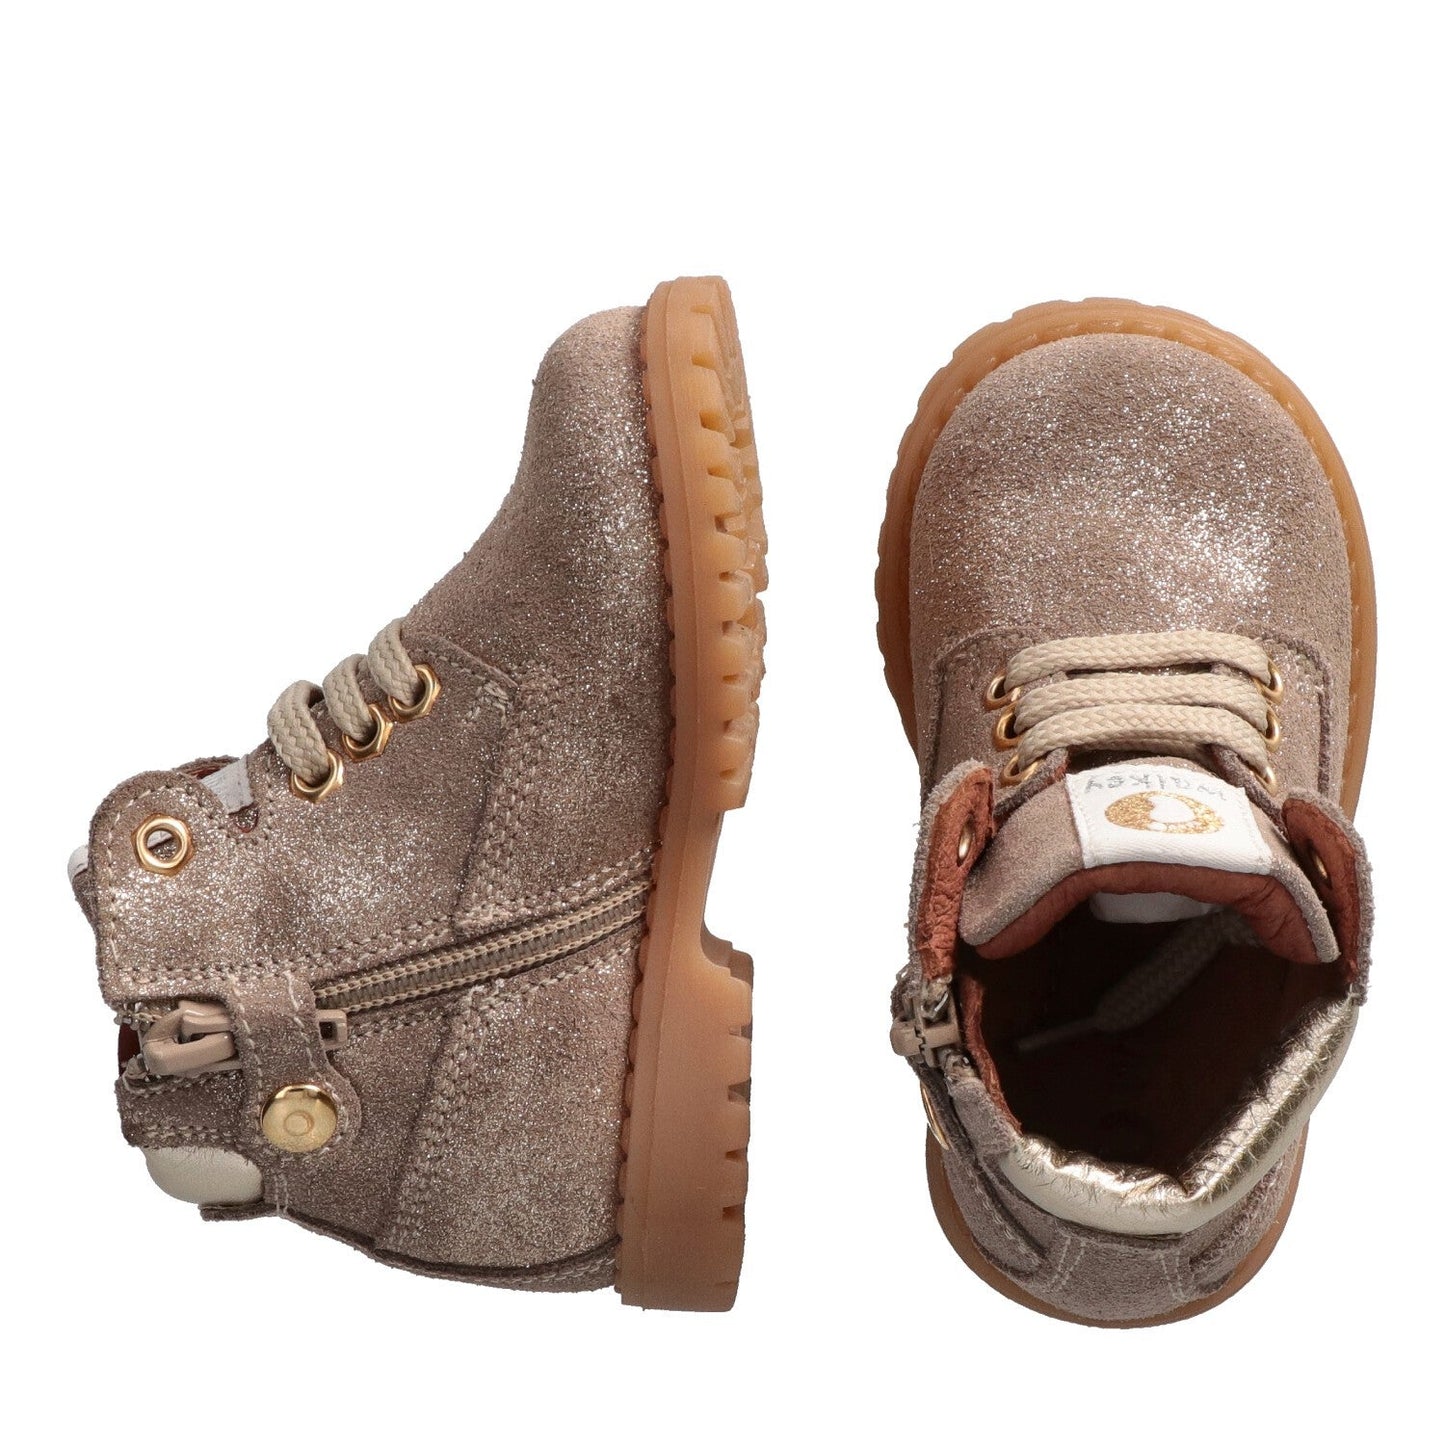 Simil Timberland con zip laterale Simil Timberland con zip laterale 